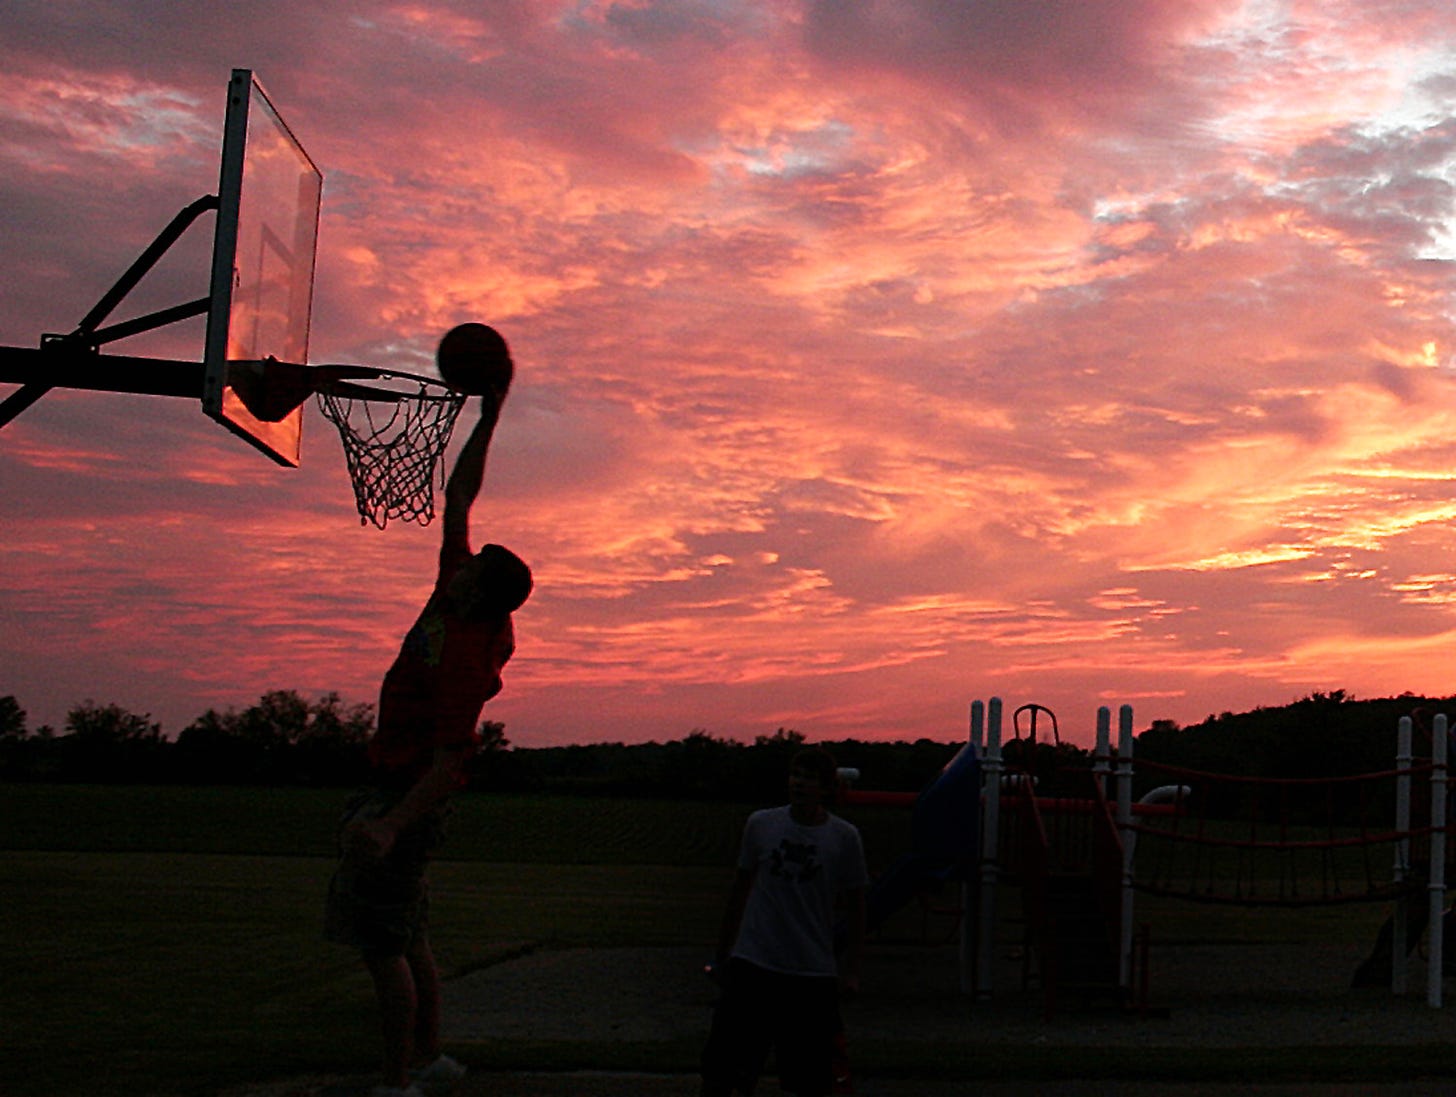 A typical Indiana scene plays out at Kennard Elementary School as local kids test their skills on the playground basketball court. The striking sunset makes a nice backdrop for this scene, which could’ve been cut from the popular movie Hoosiers itself. 